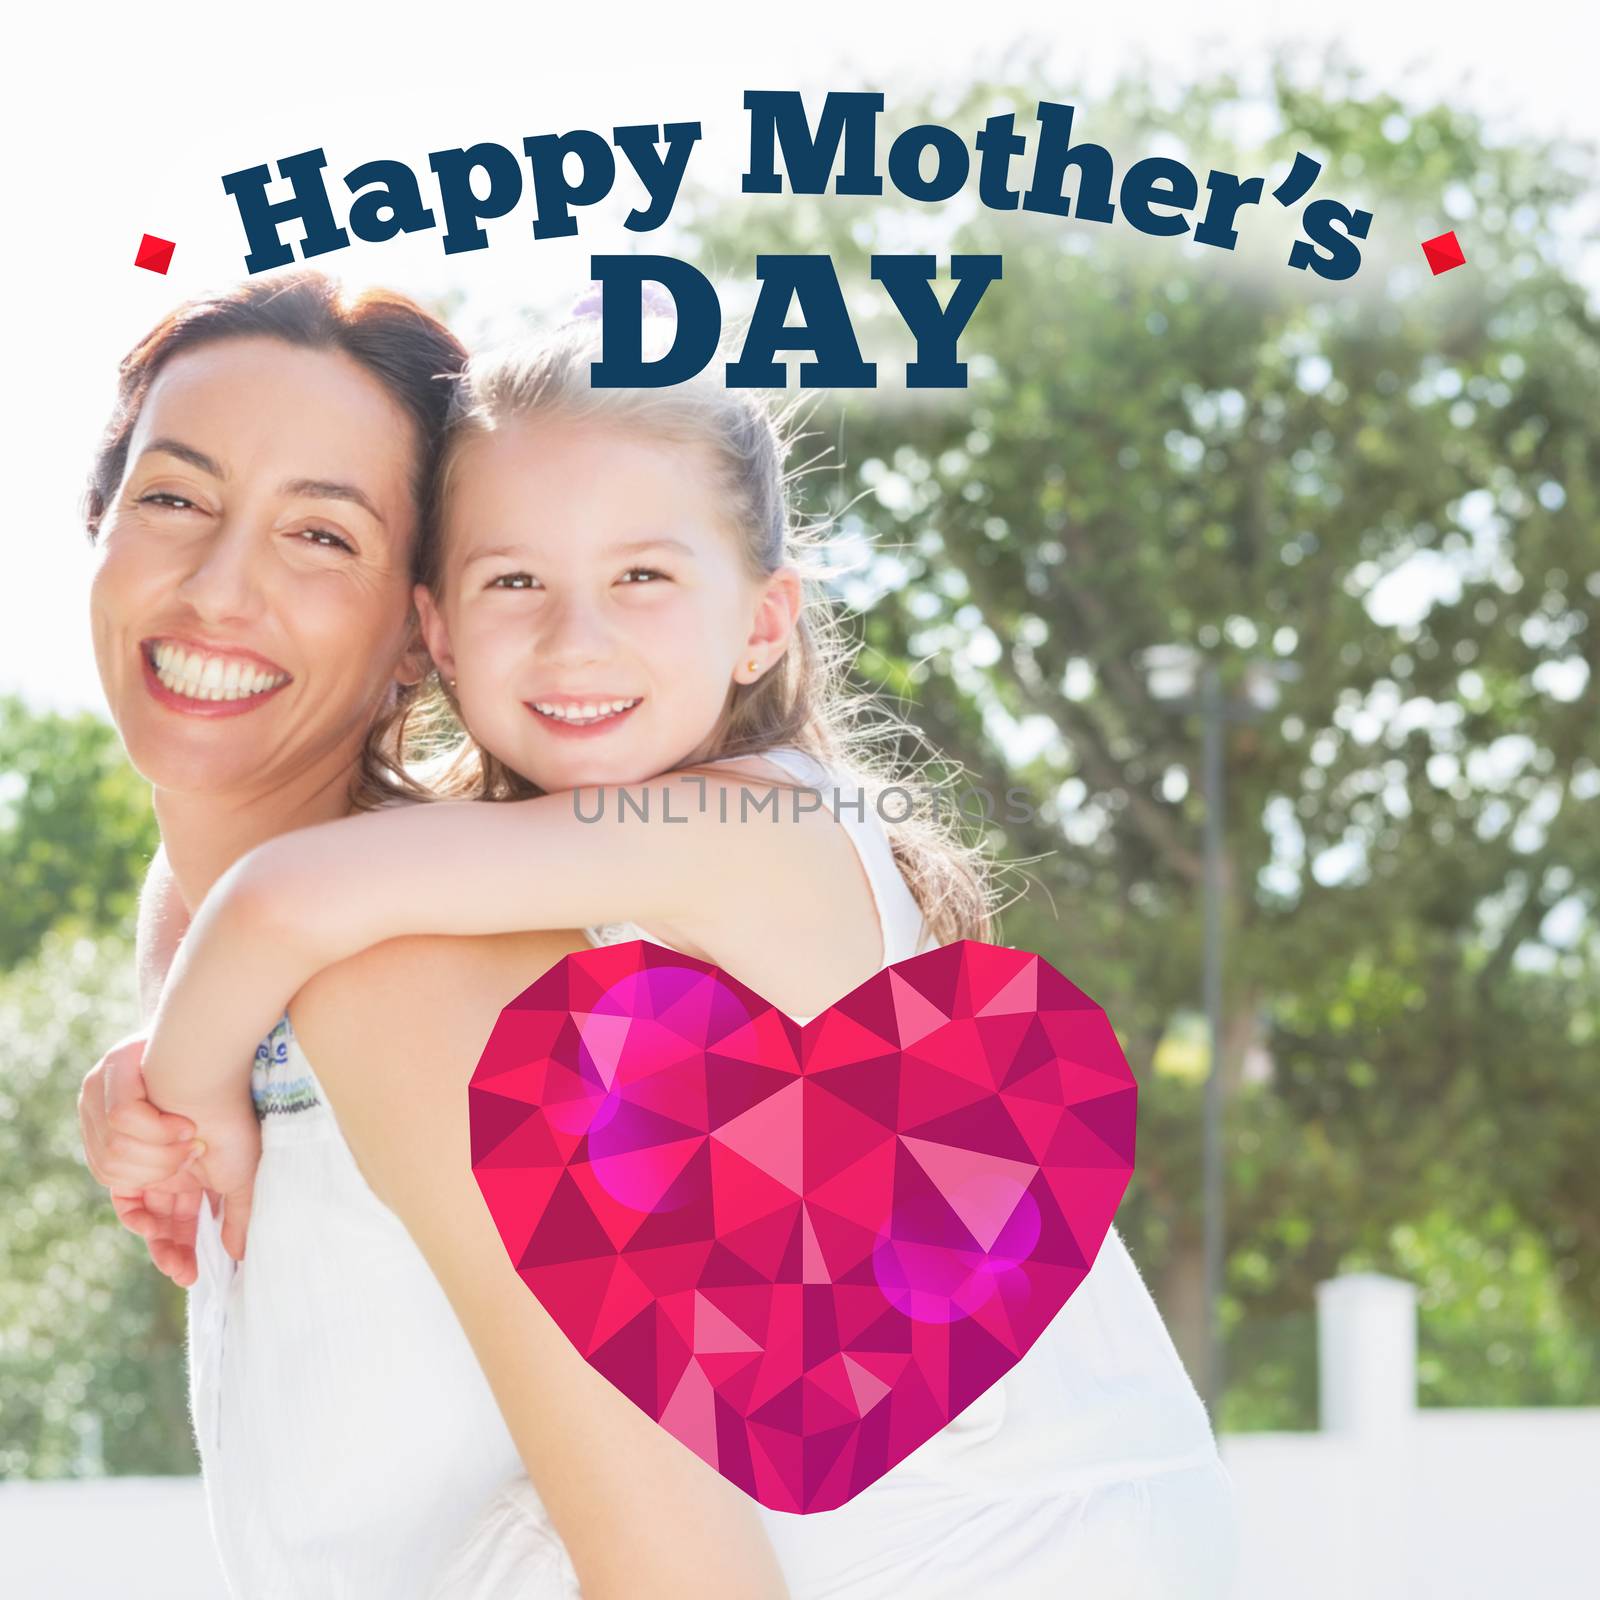 Composite image of happy mothers day by Wavebreakmedia